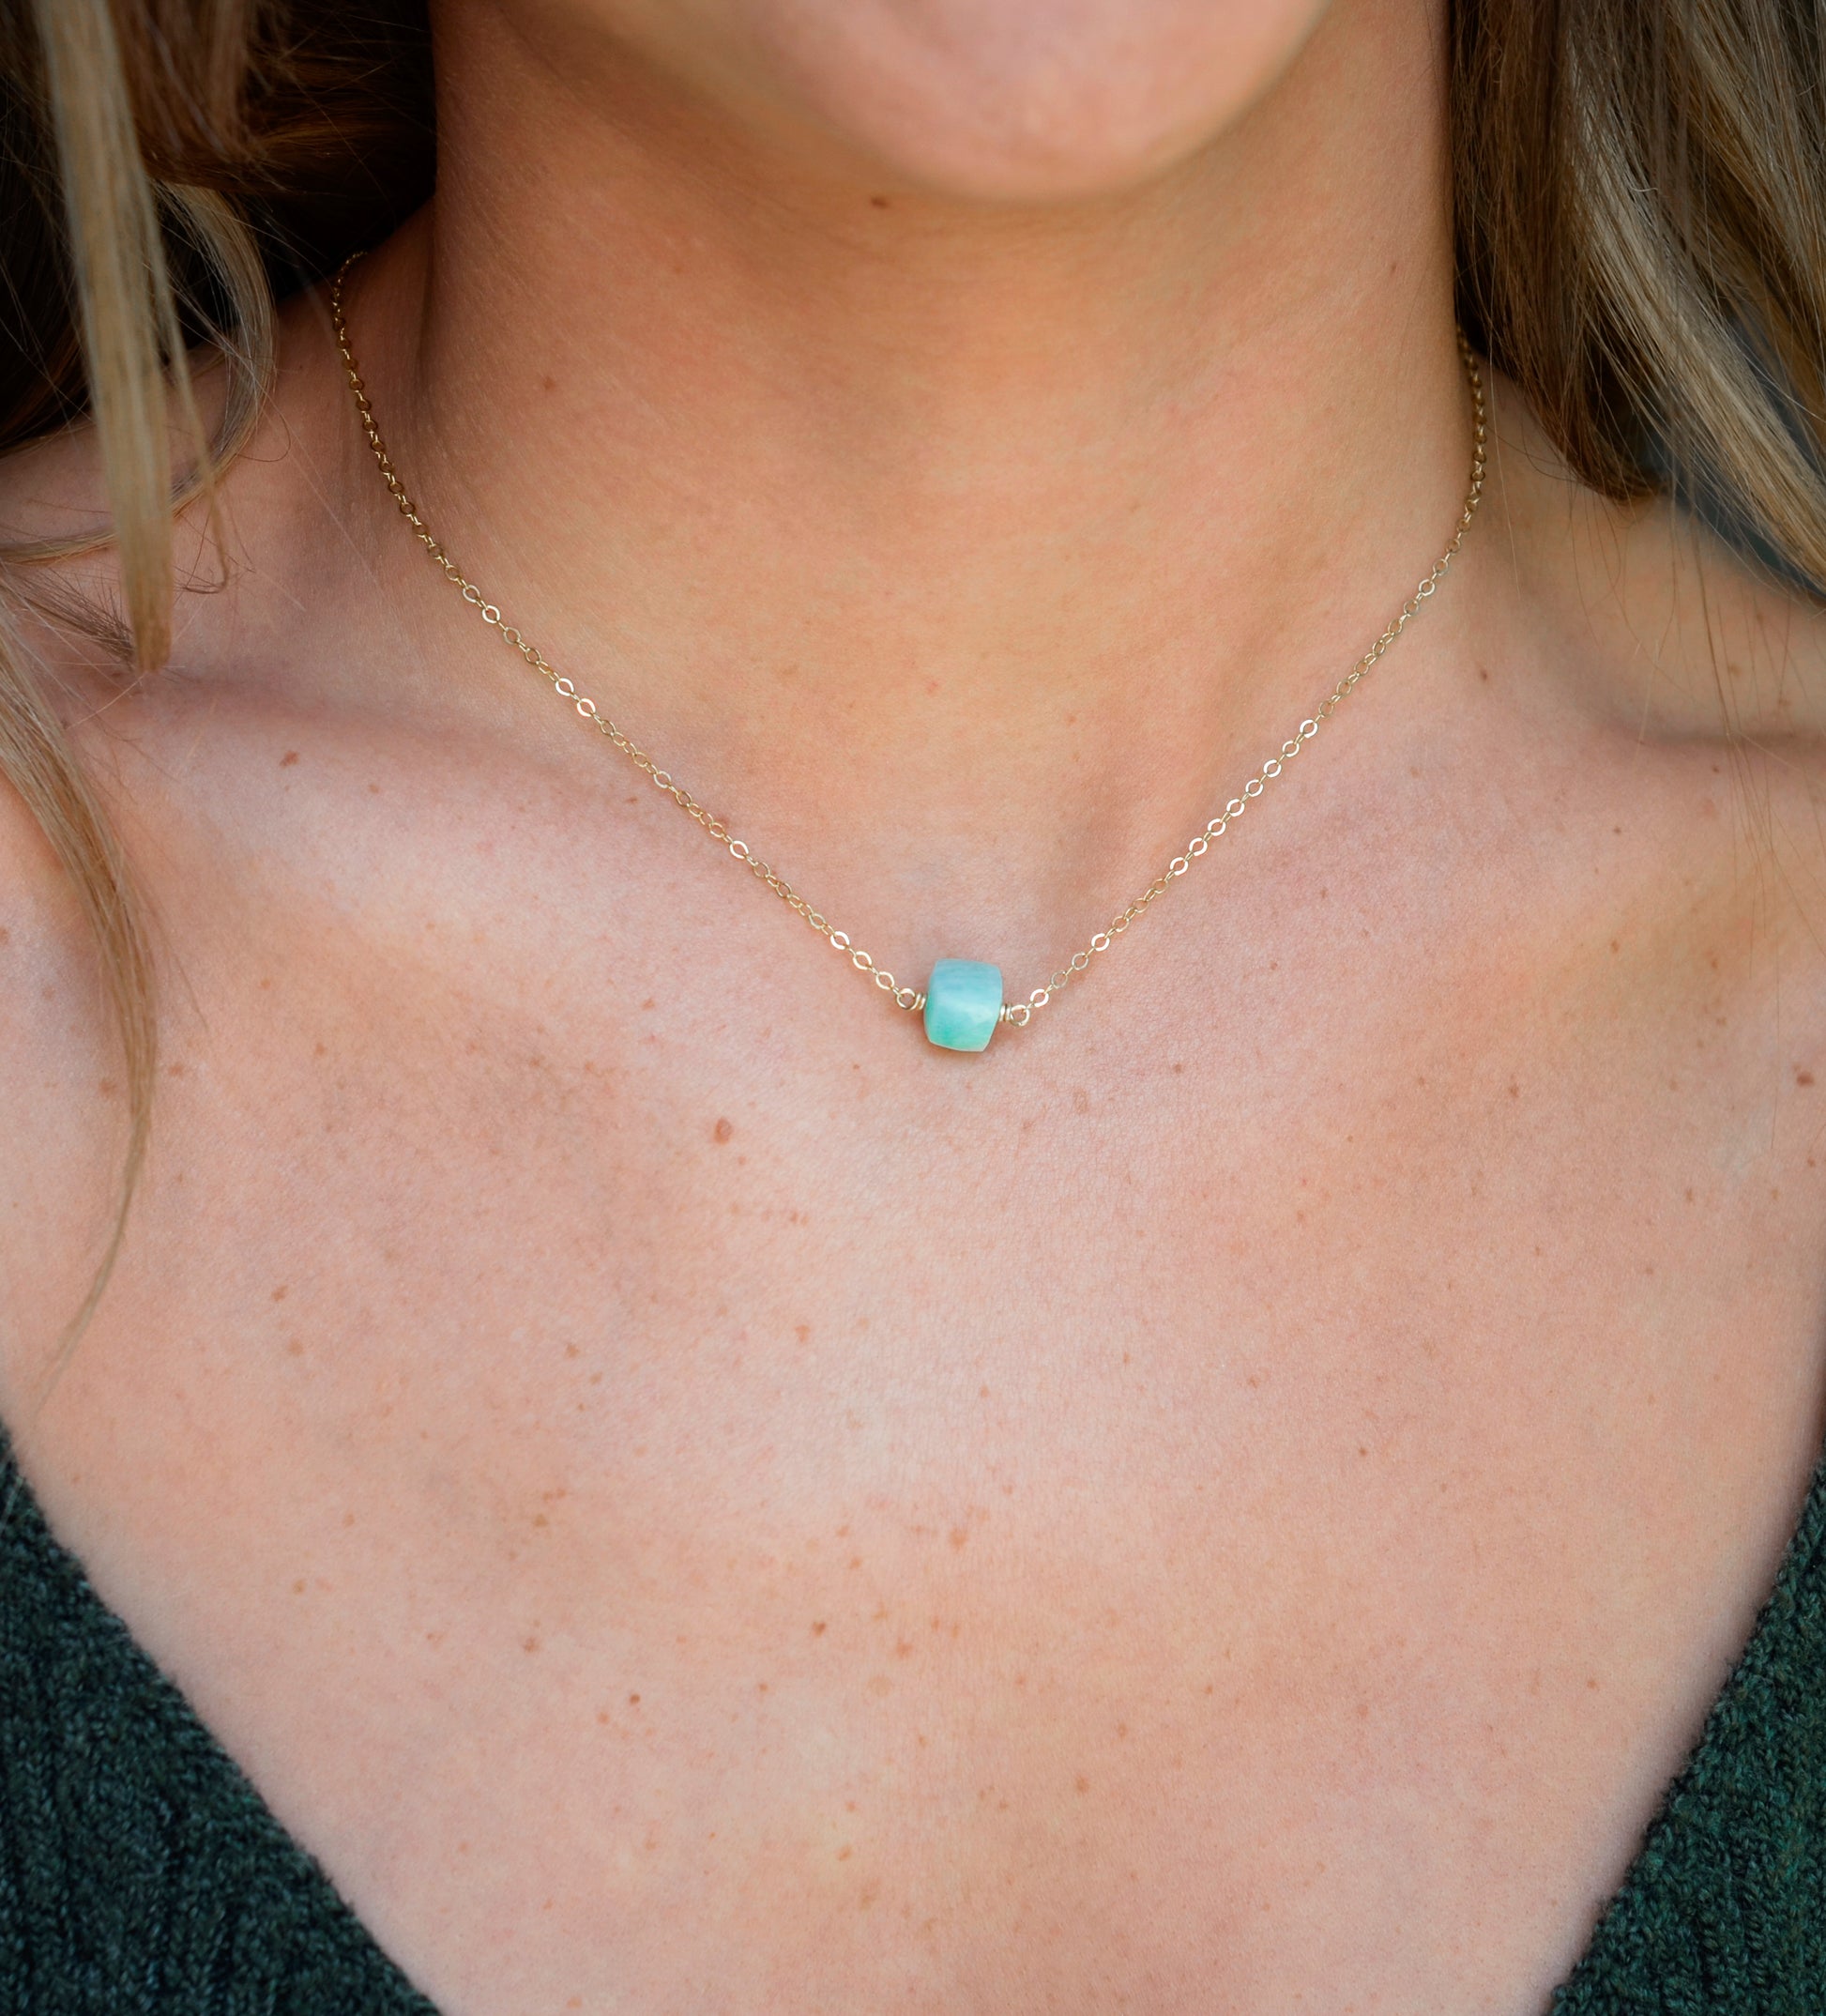 Genuine aqua blue Amazonite gemstone cut into a faceted cube and suspended on a gold filled cable chain. Modeled Image.